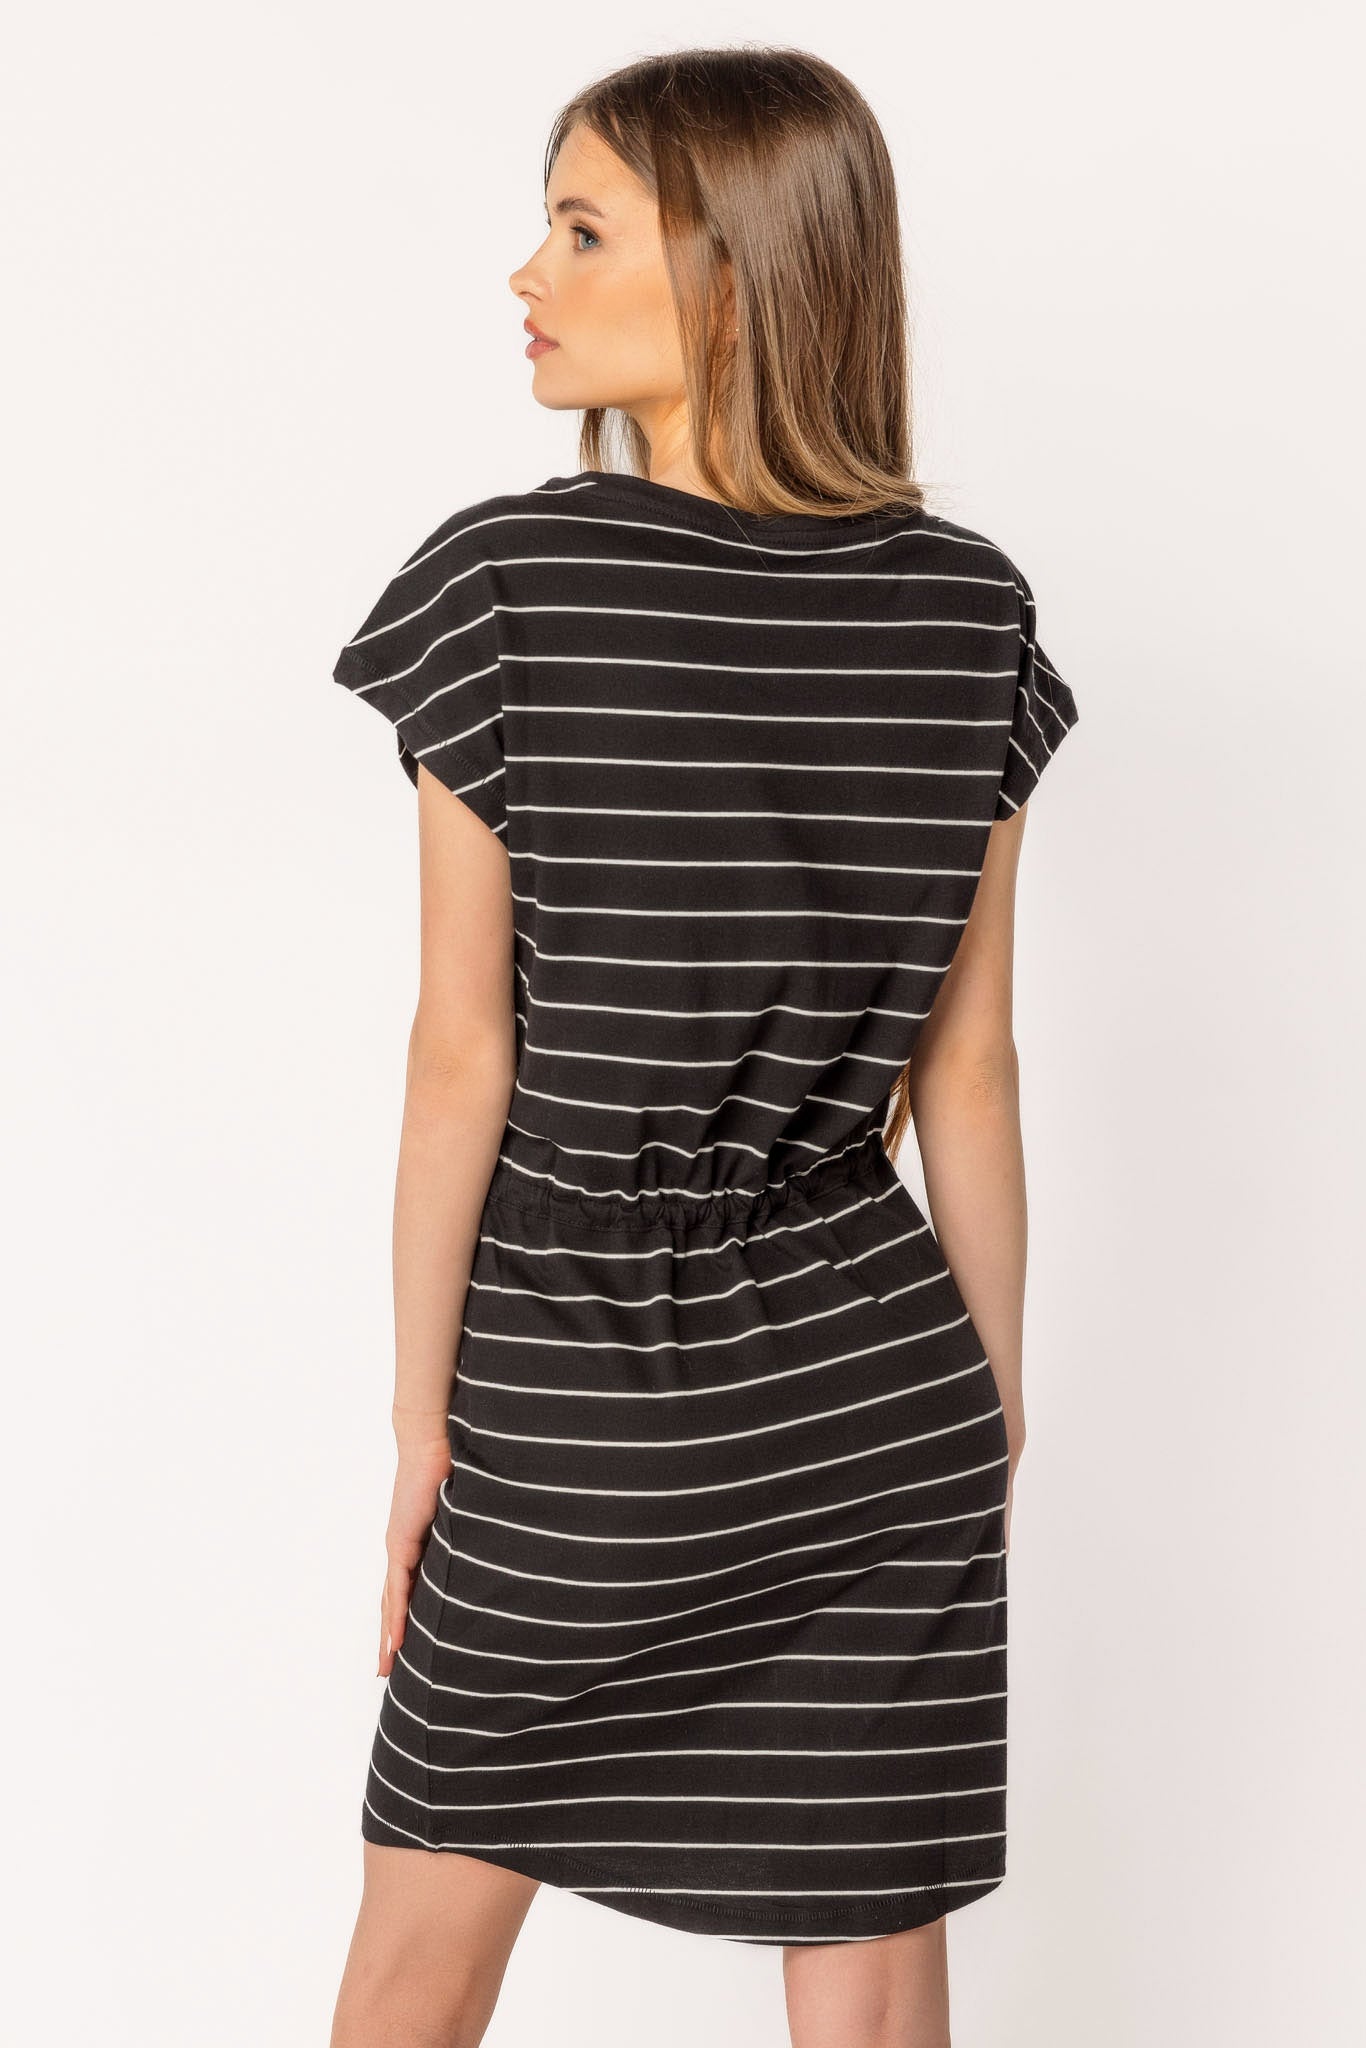 Only May Stripe T-Shirt Dress